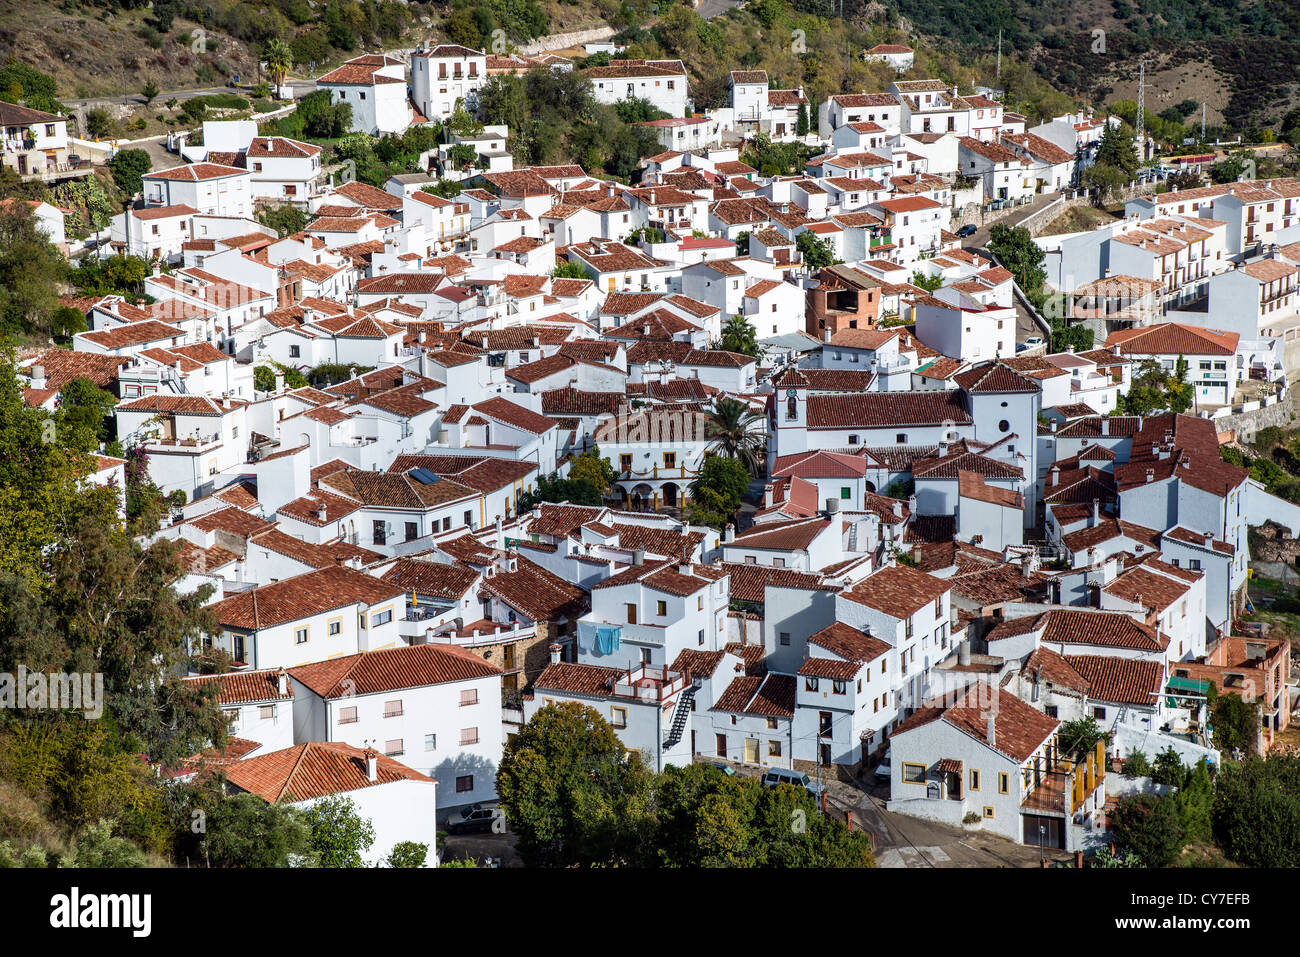 View of the andalusian white town of Algatocin, province of Malaga, Andalusia, Spain Stock Photo